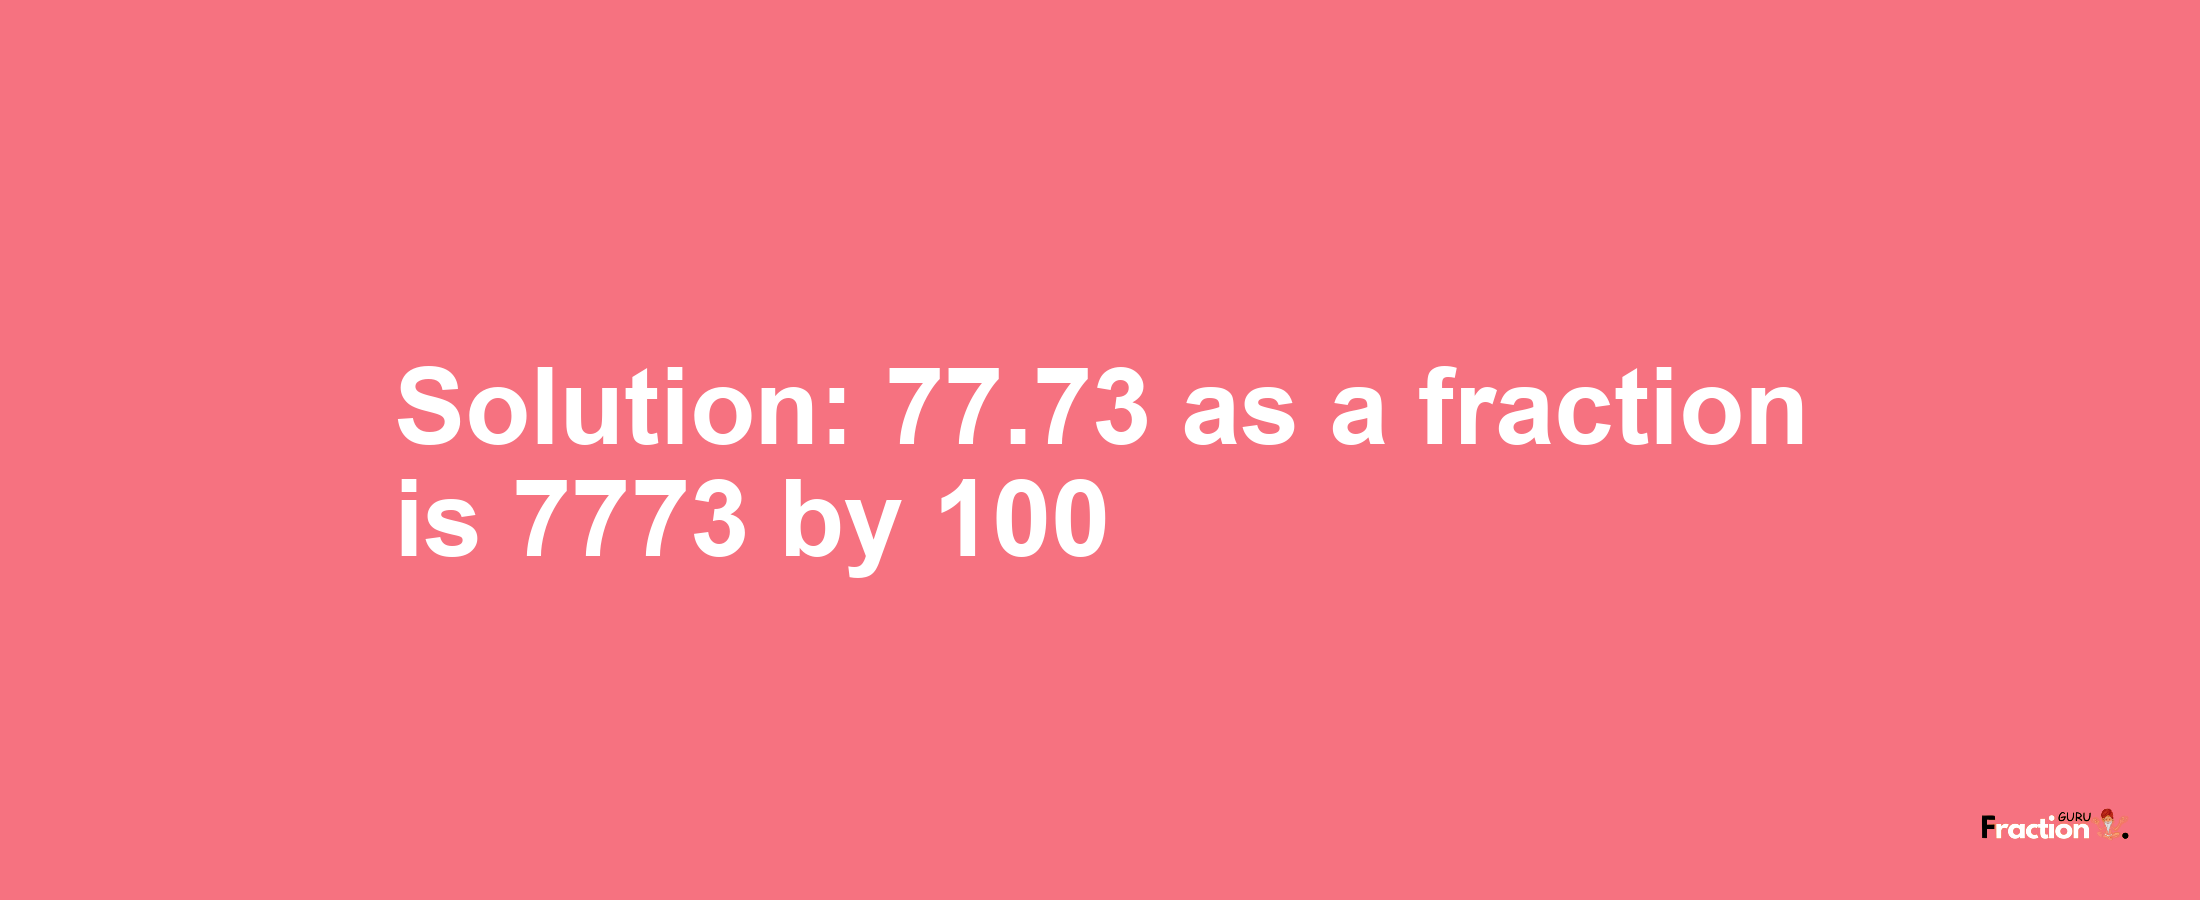 Solution:77.73 as a fraction is 7773/100